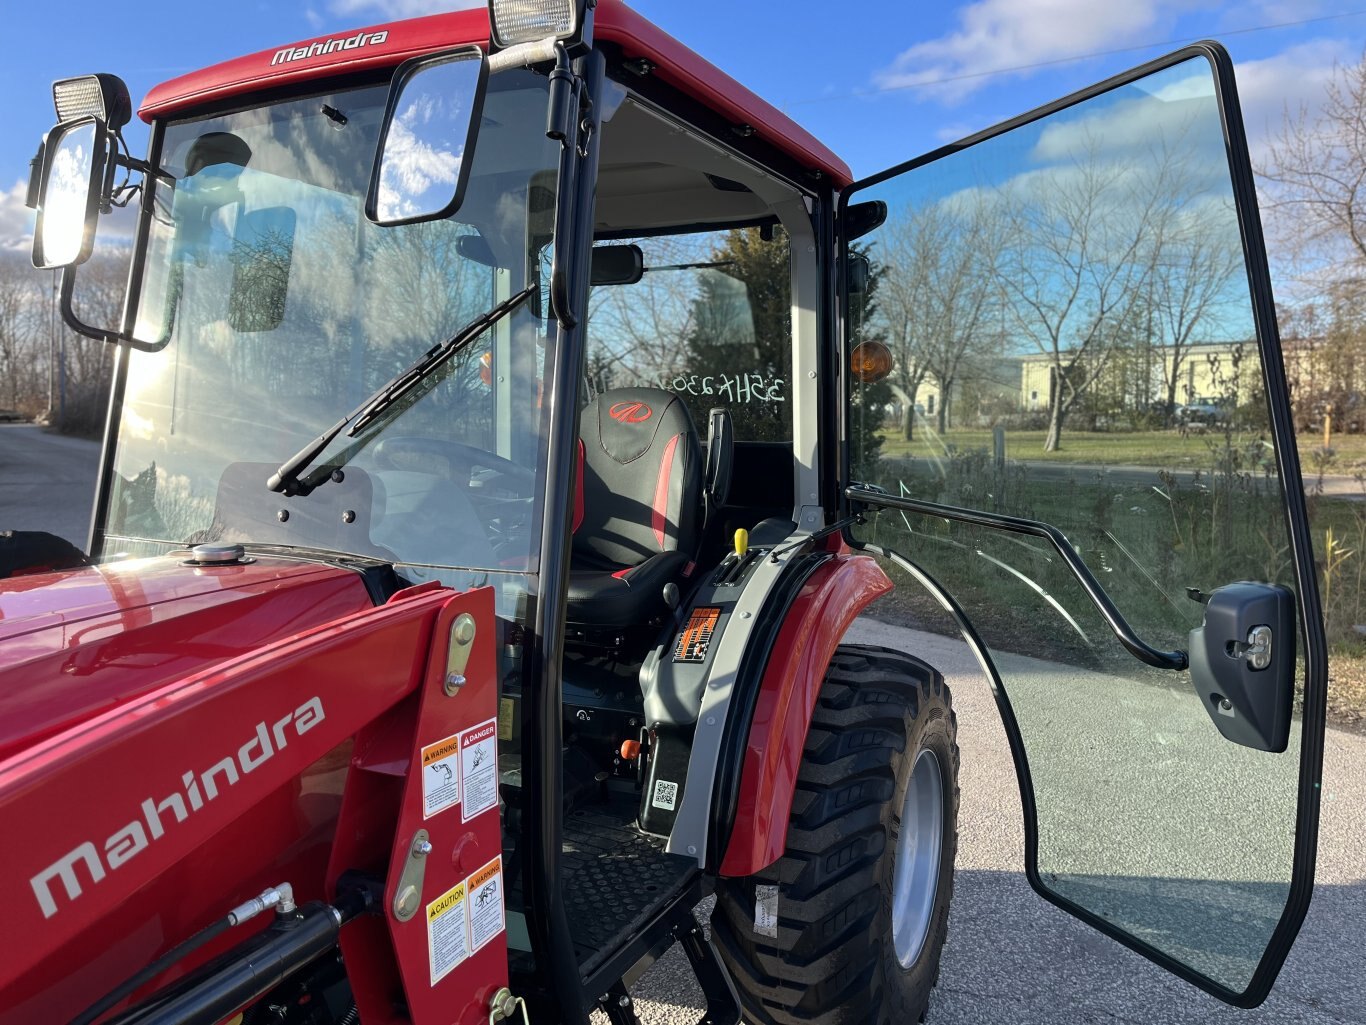 2023 Mahindra 1635 HST 4WD Cab Tractor with Loader